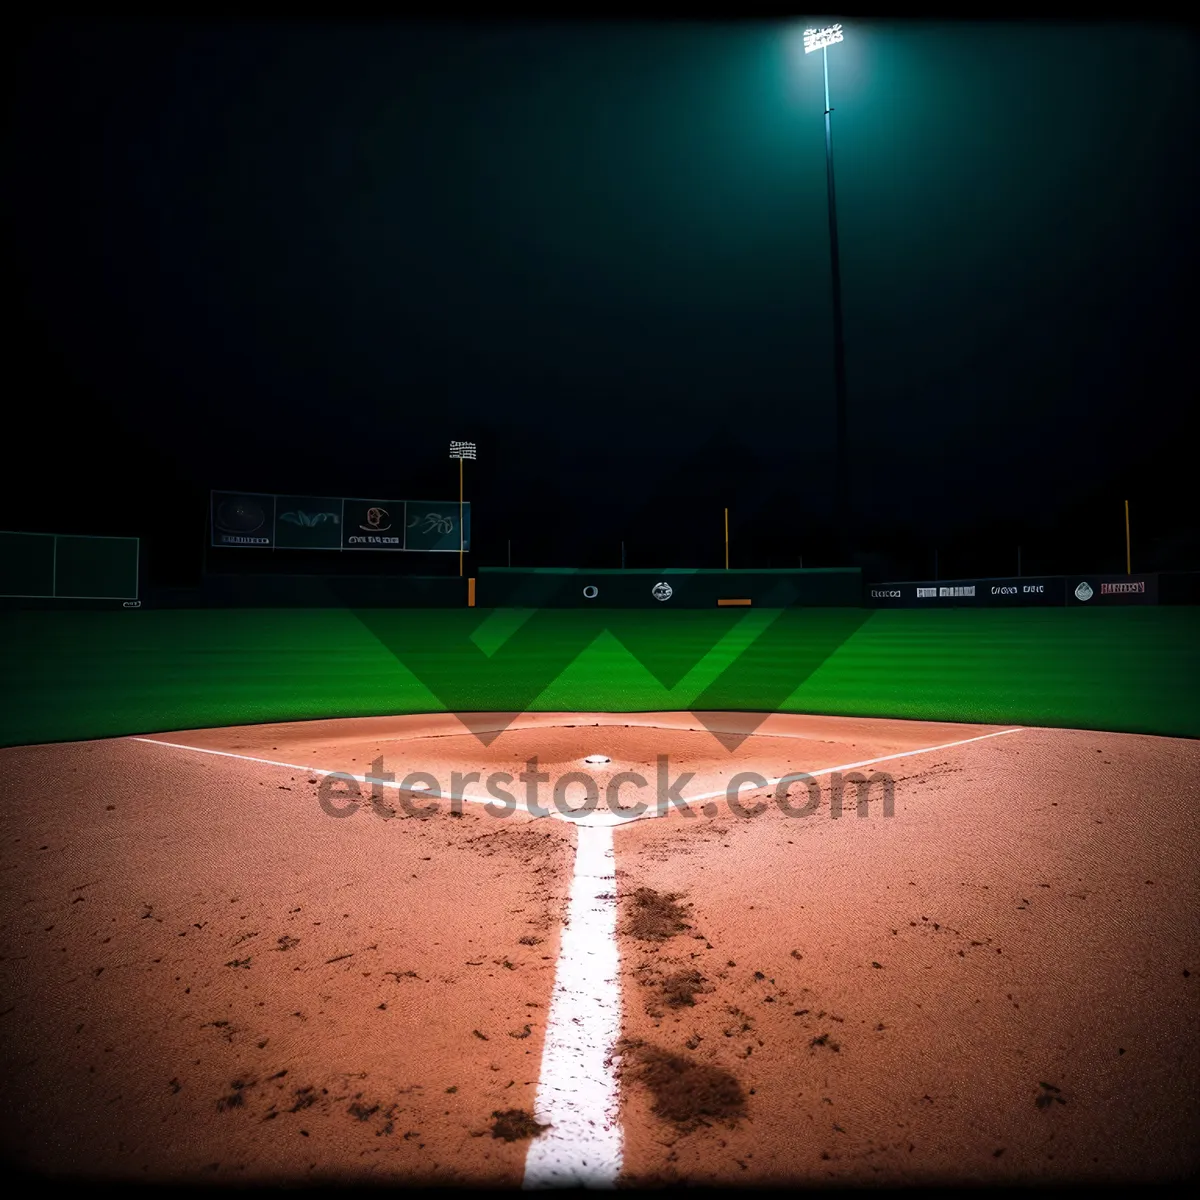 Picture of Baseball equipment resting on a grassy field